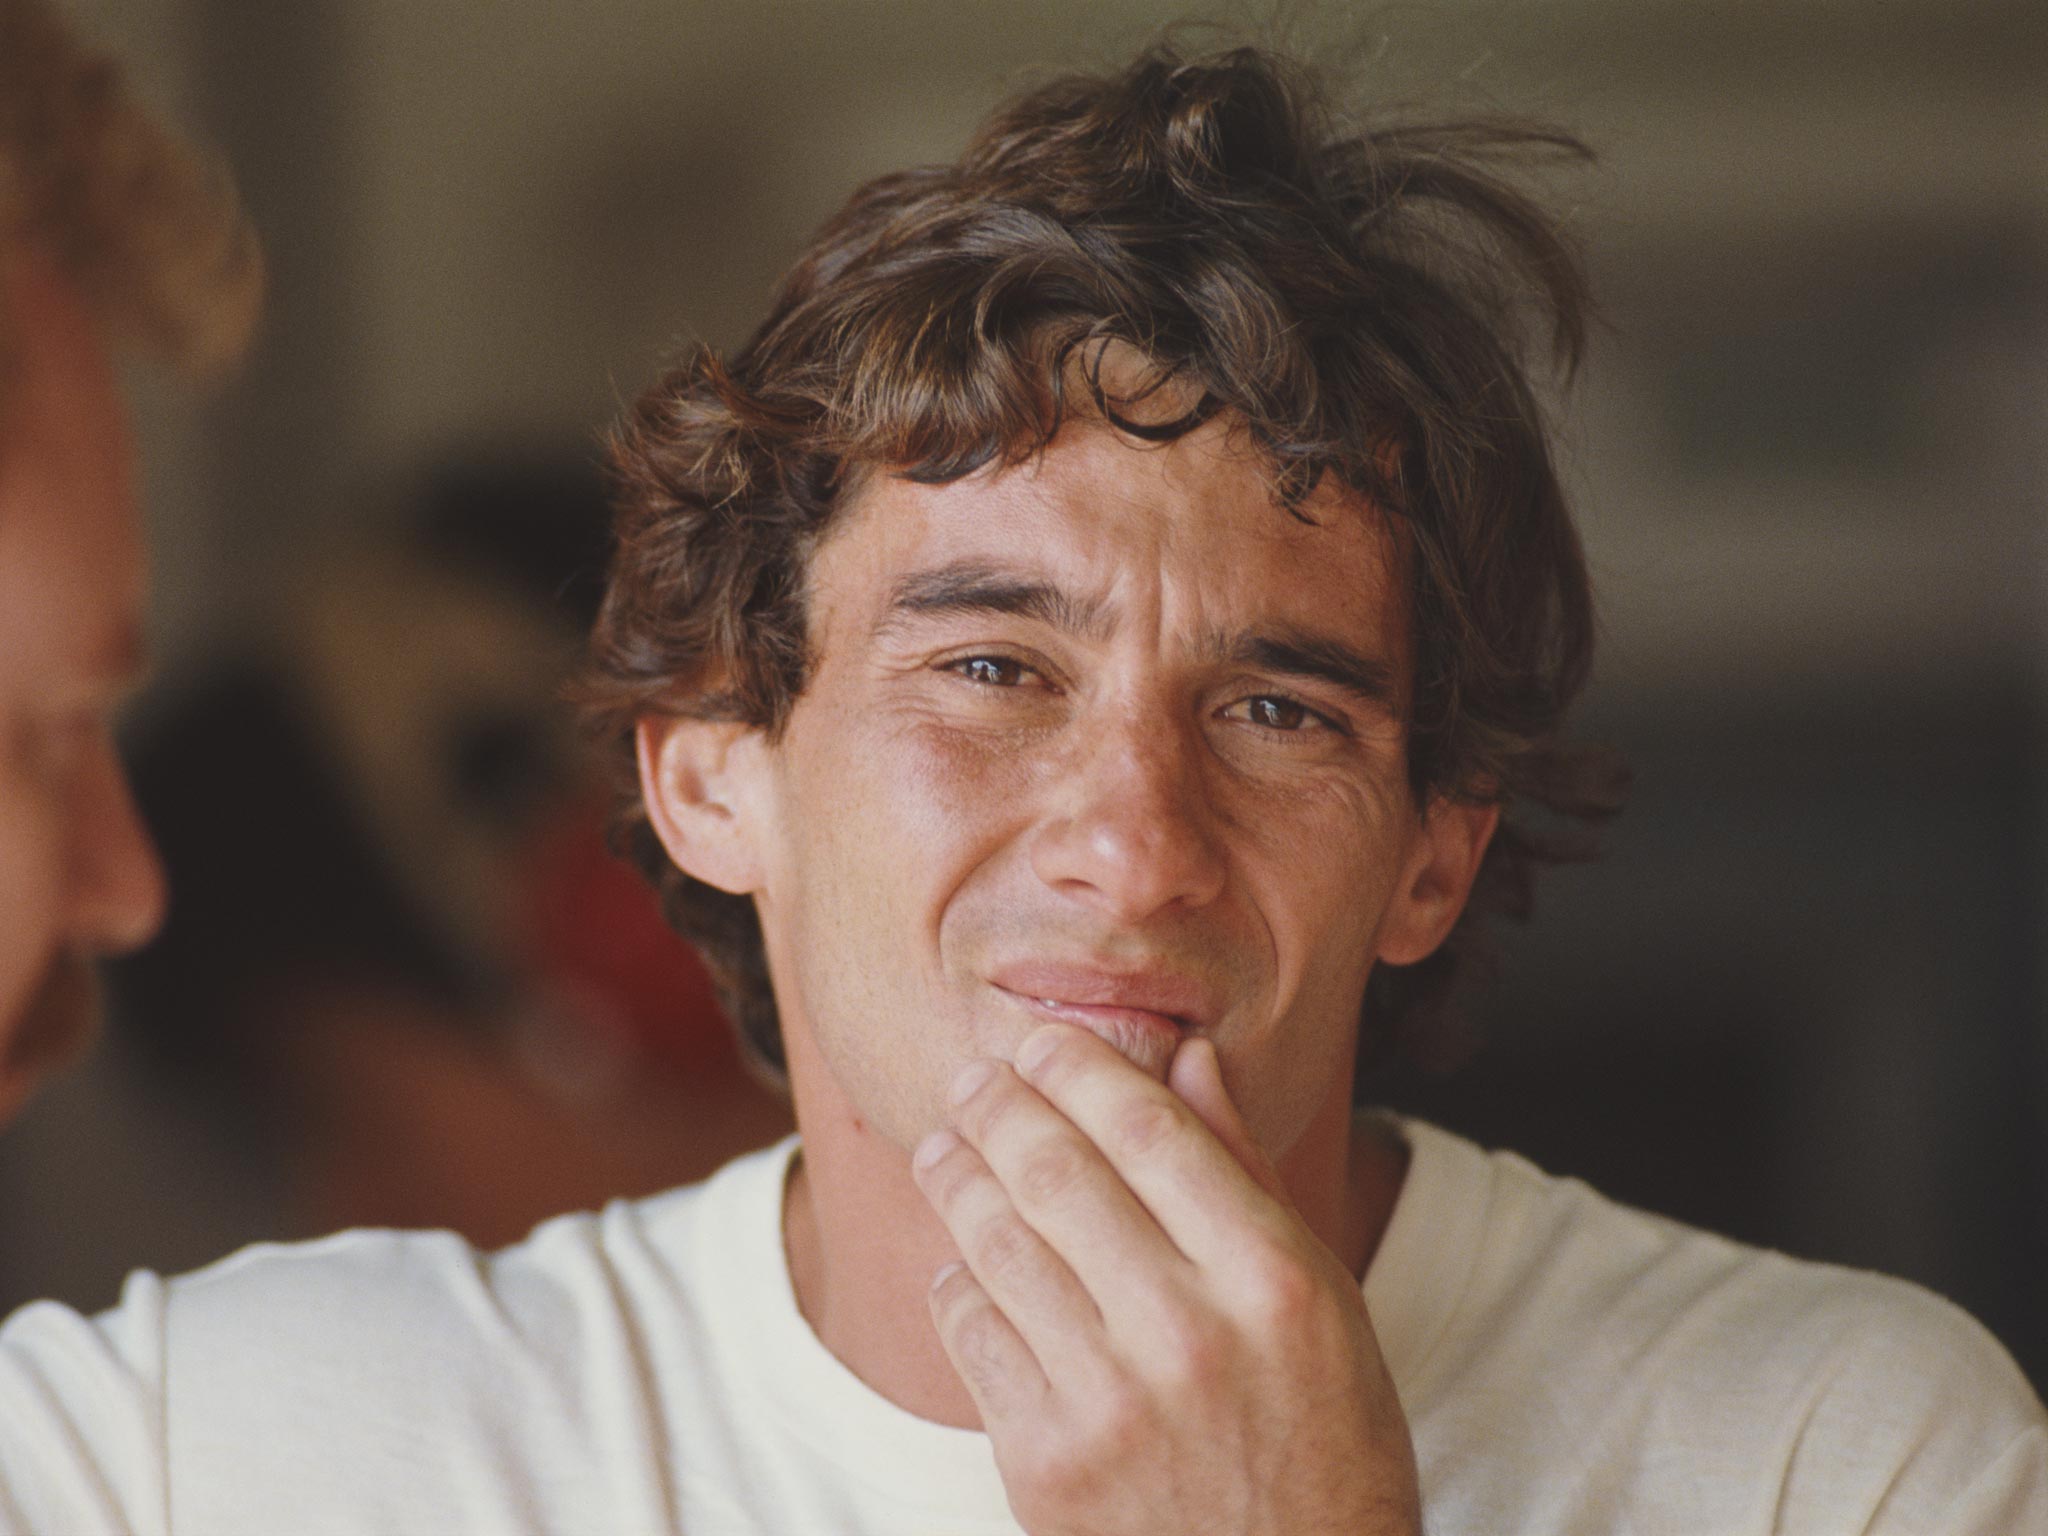 Senna inspired a generation of drivers, including Lewis Hamilton